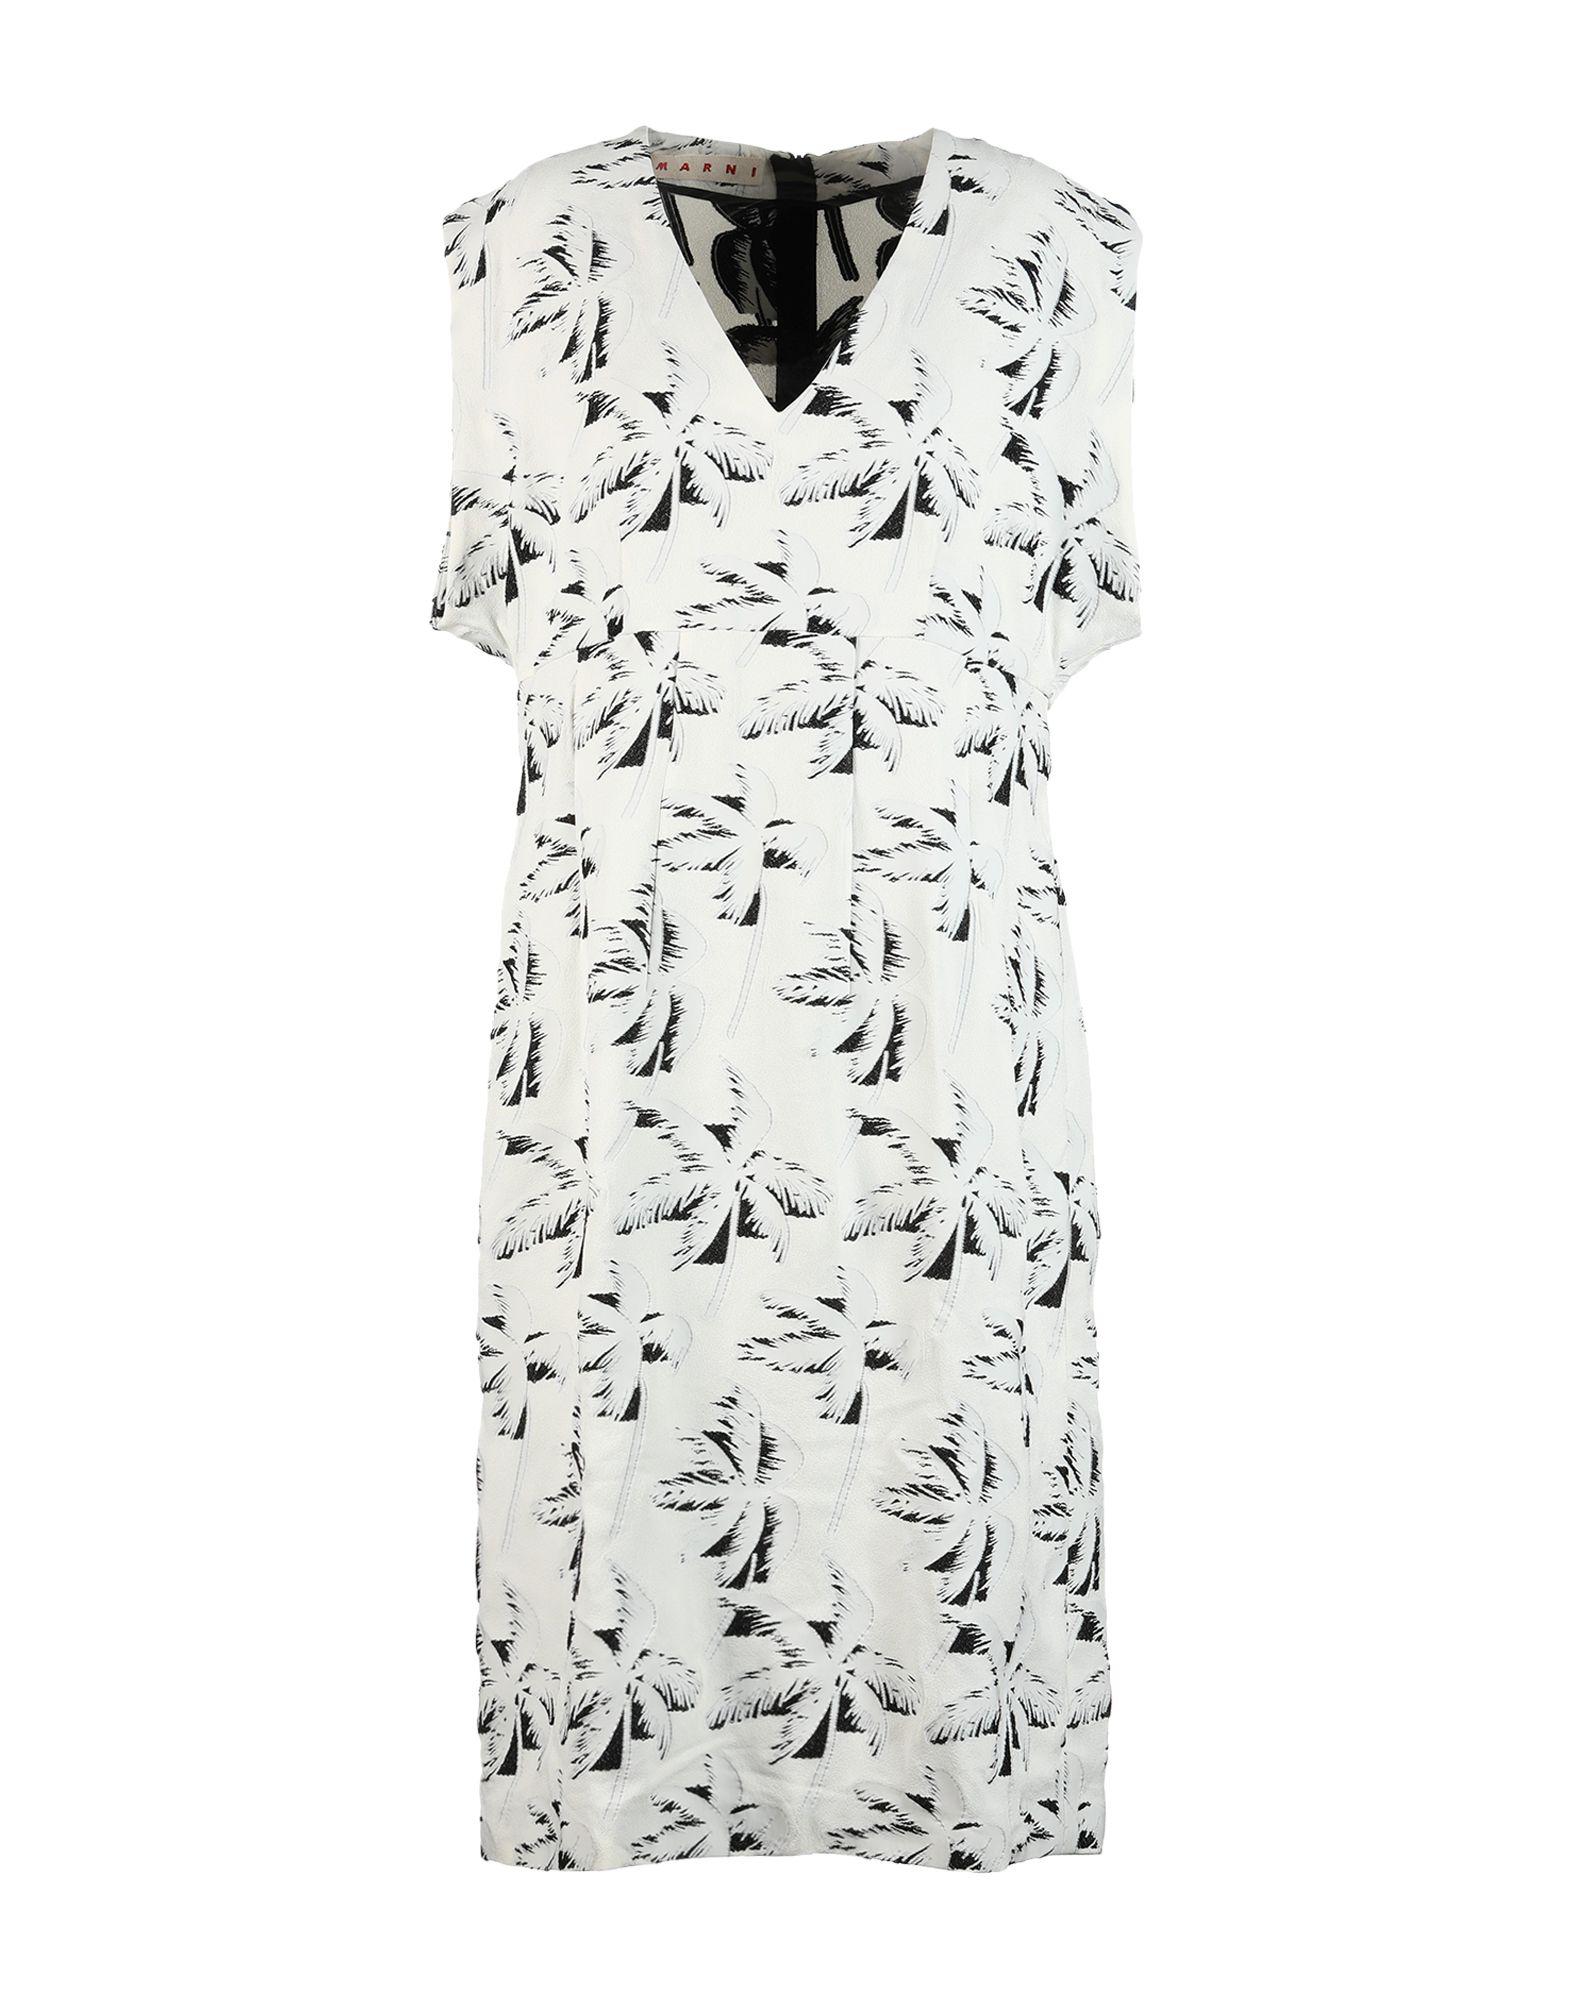 Marni Synthetic Knee-length Dress in White - Lyst